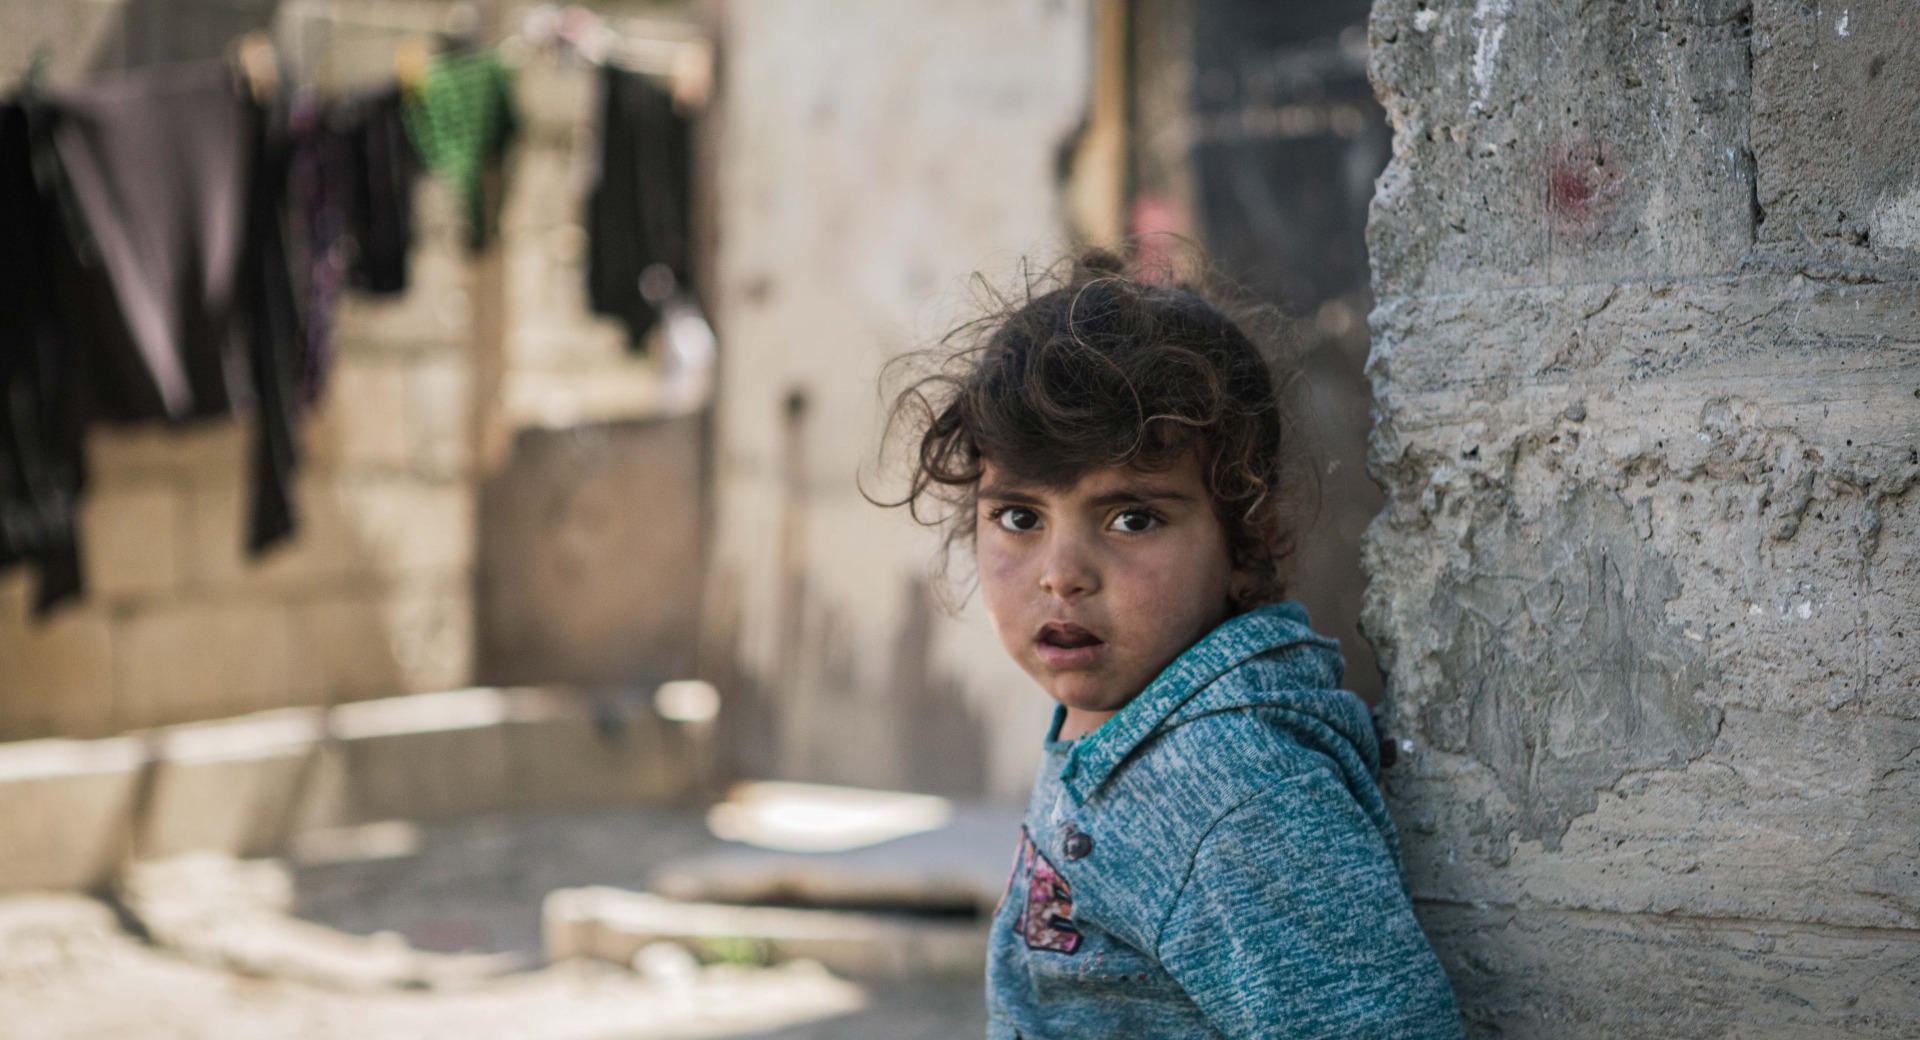 A Syrian refugee child in Lebanon.